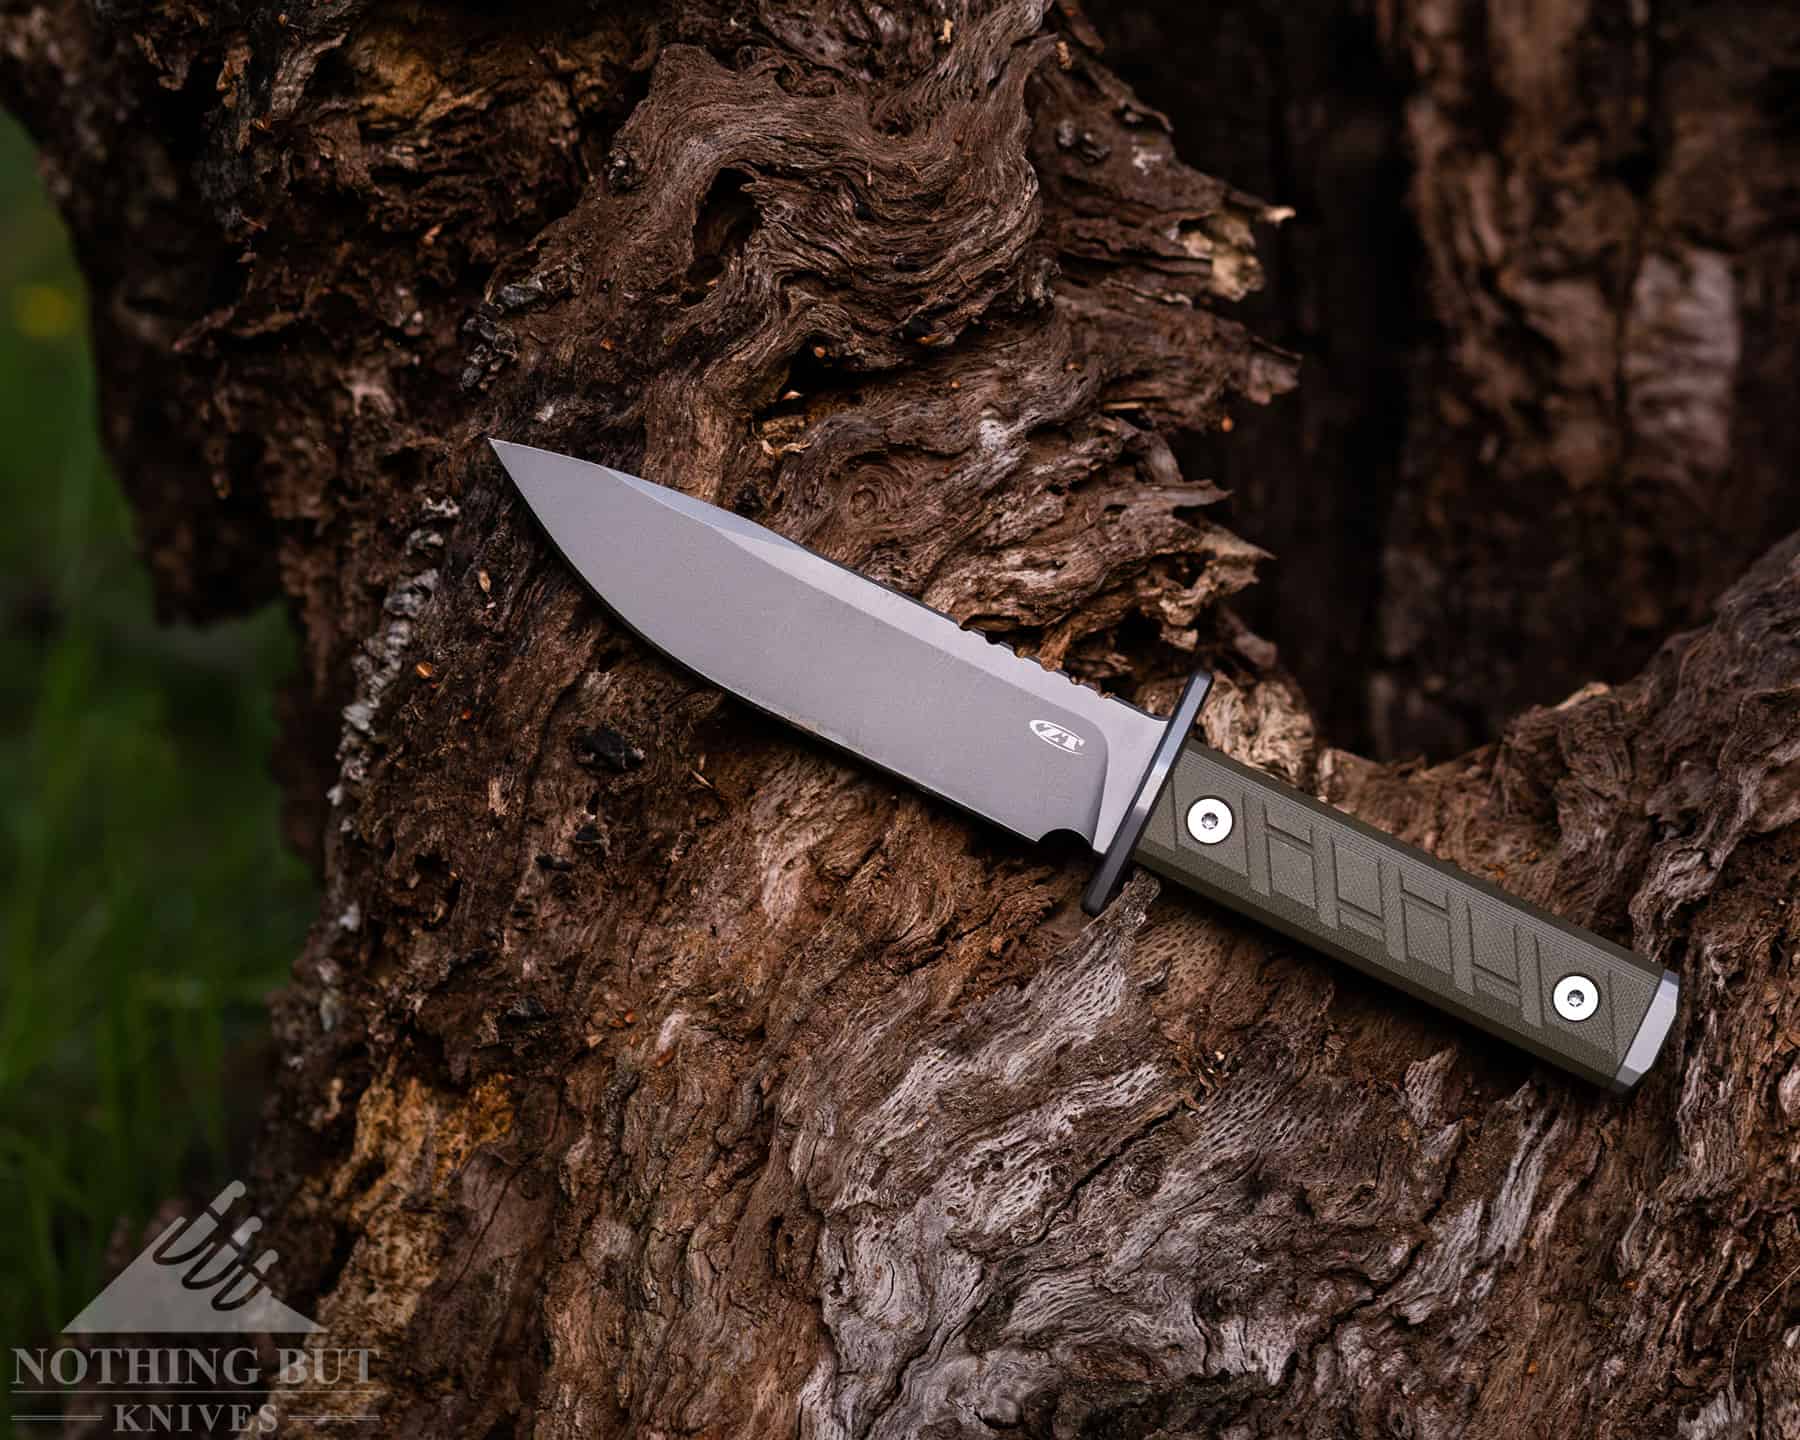 The Zero Tolerance 0006 is a new release in 2023.